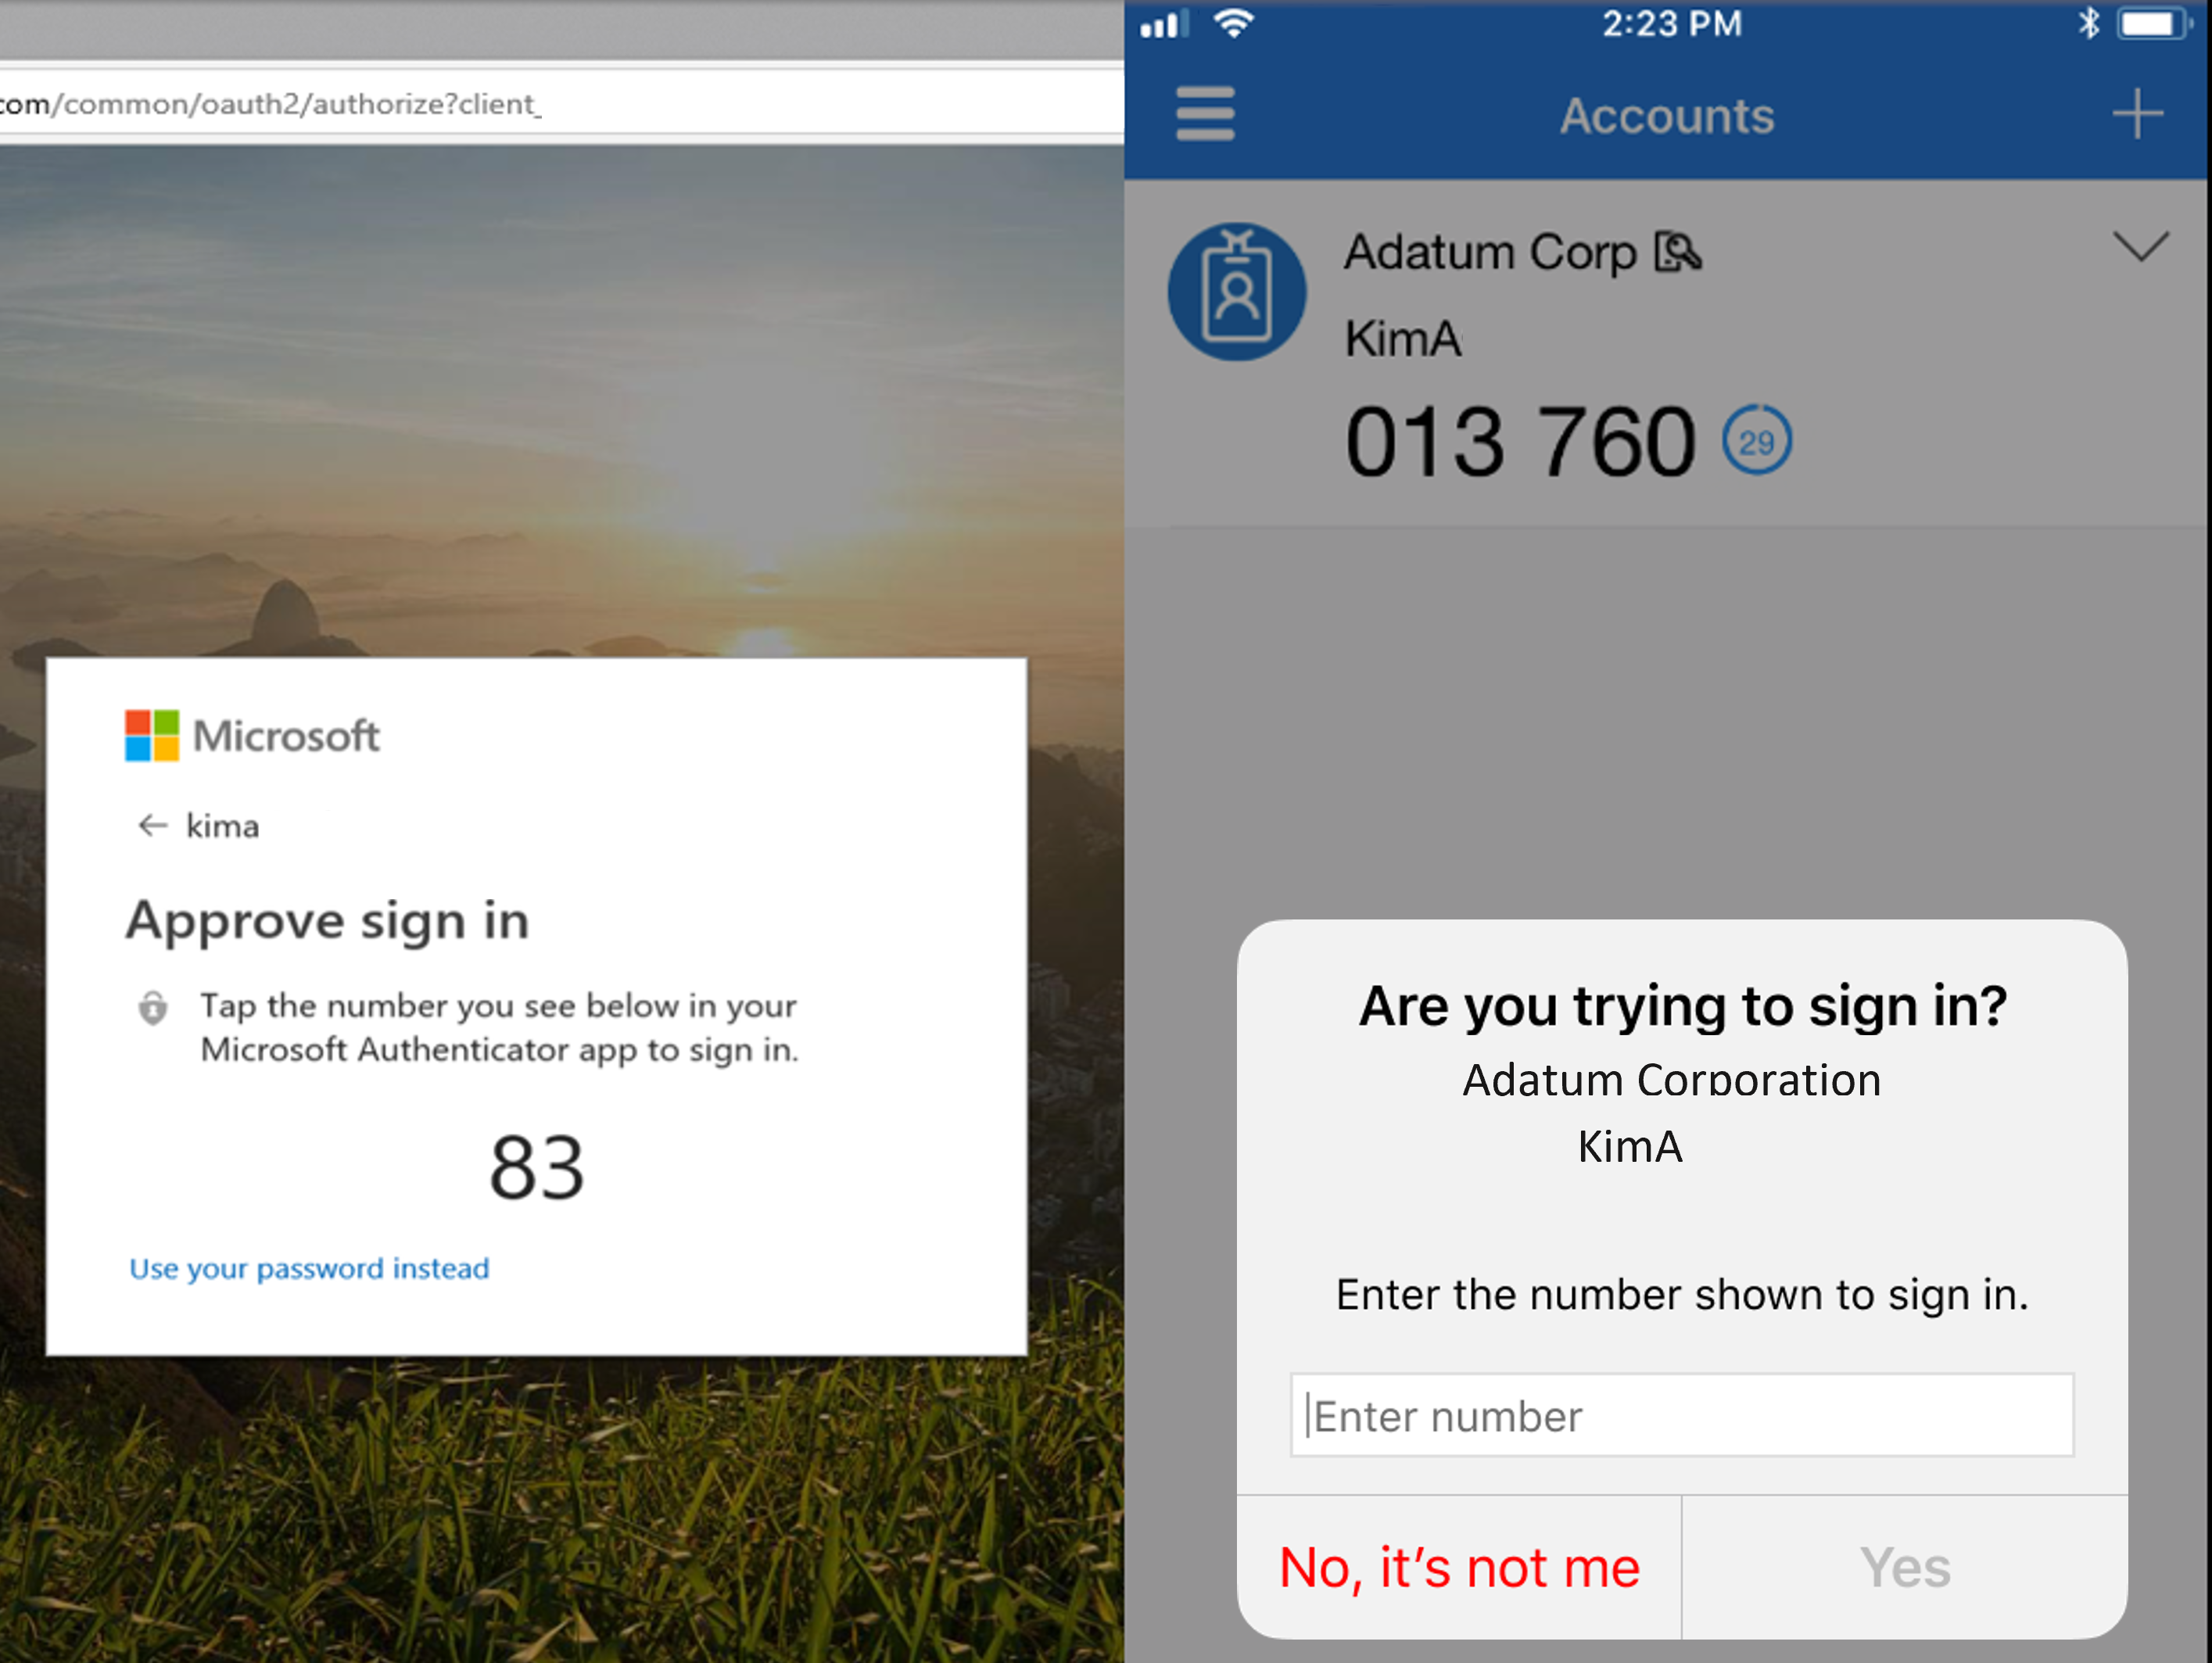 Screenshot of the sign-in verification screen the user sees when verifying authentication with the app.